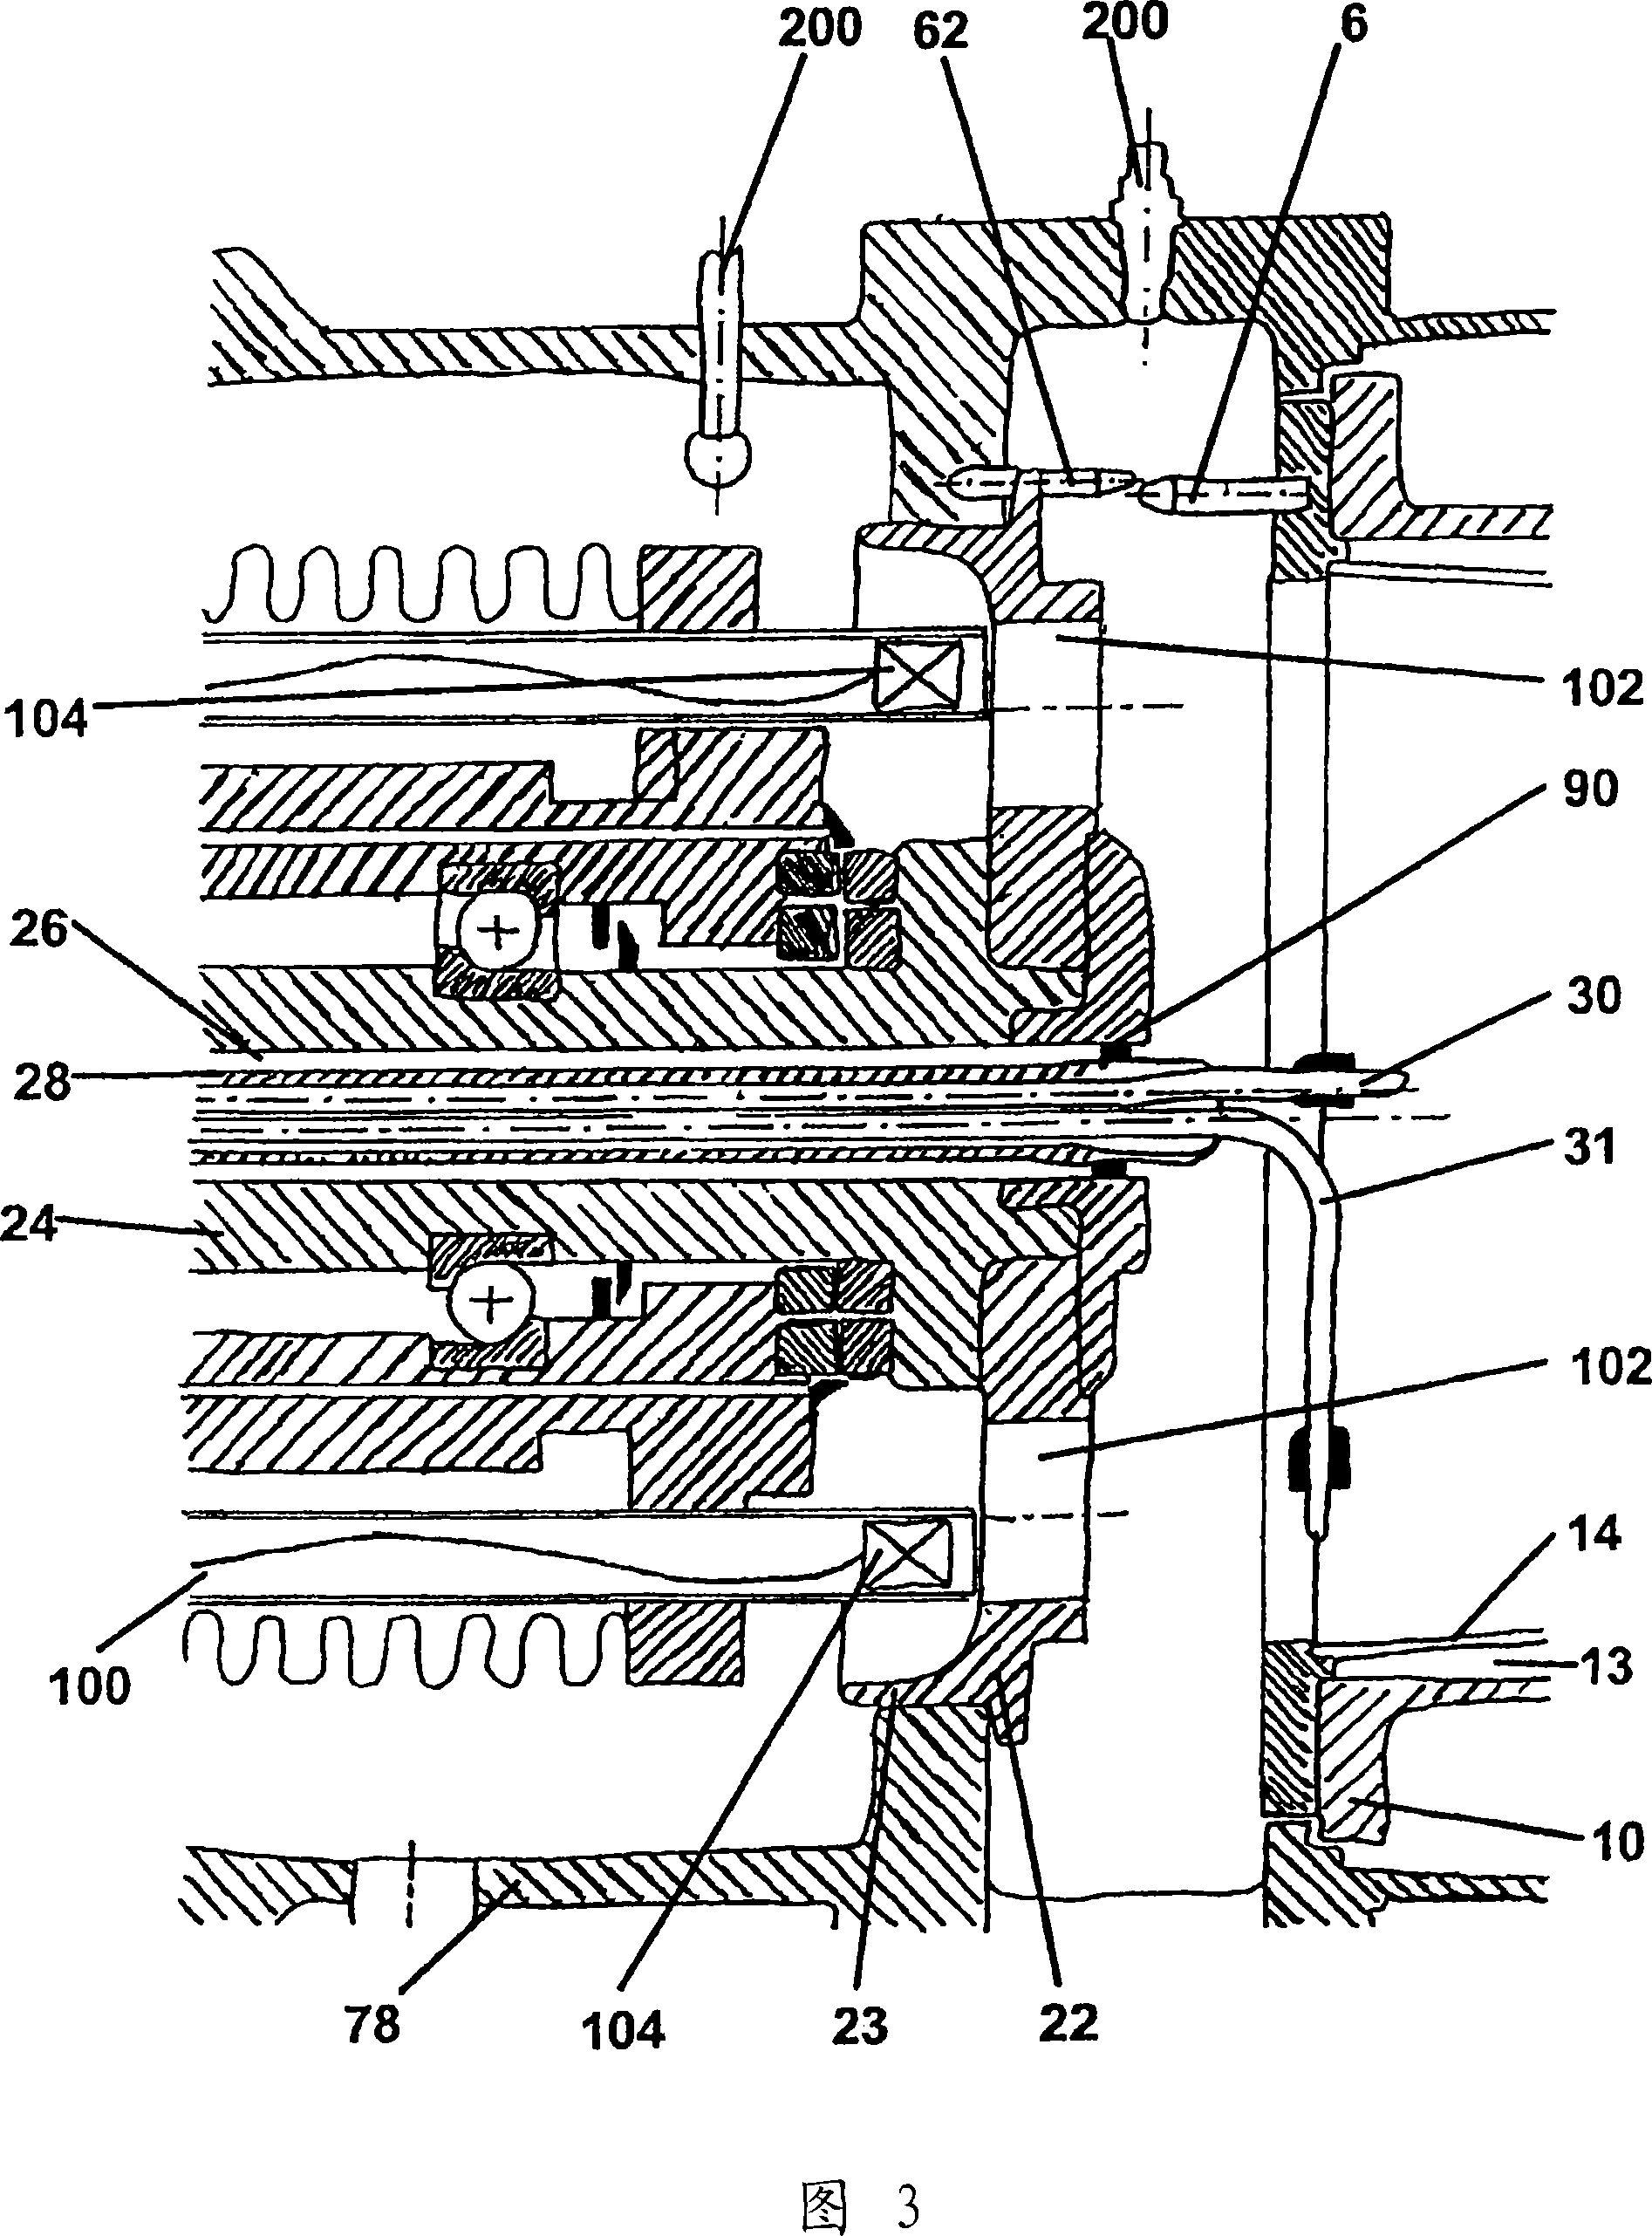 Centrifugal device comprising improved process analysis technology